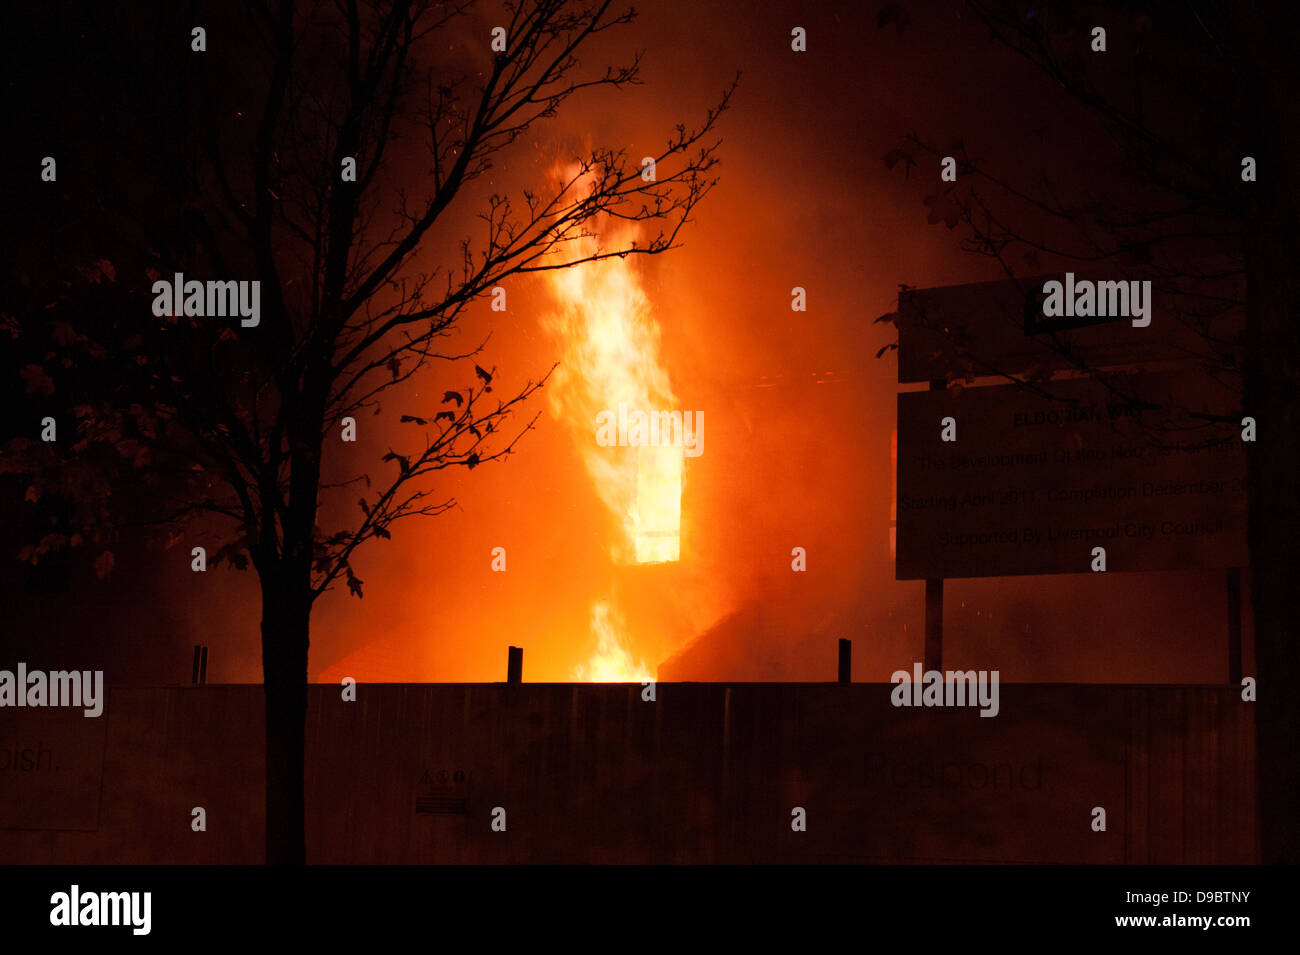 Fierce Flames from House Bedroom Fire Real Stock Photo